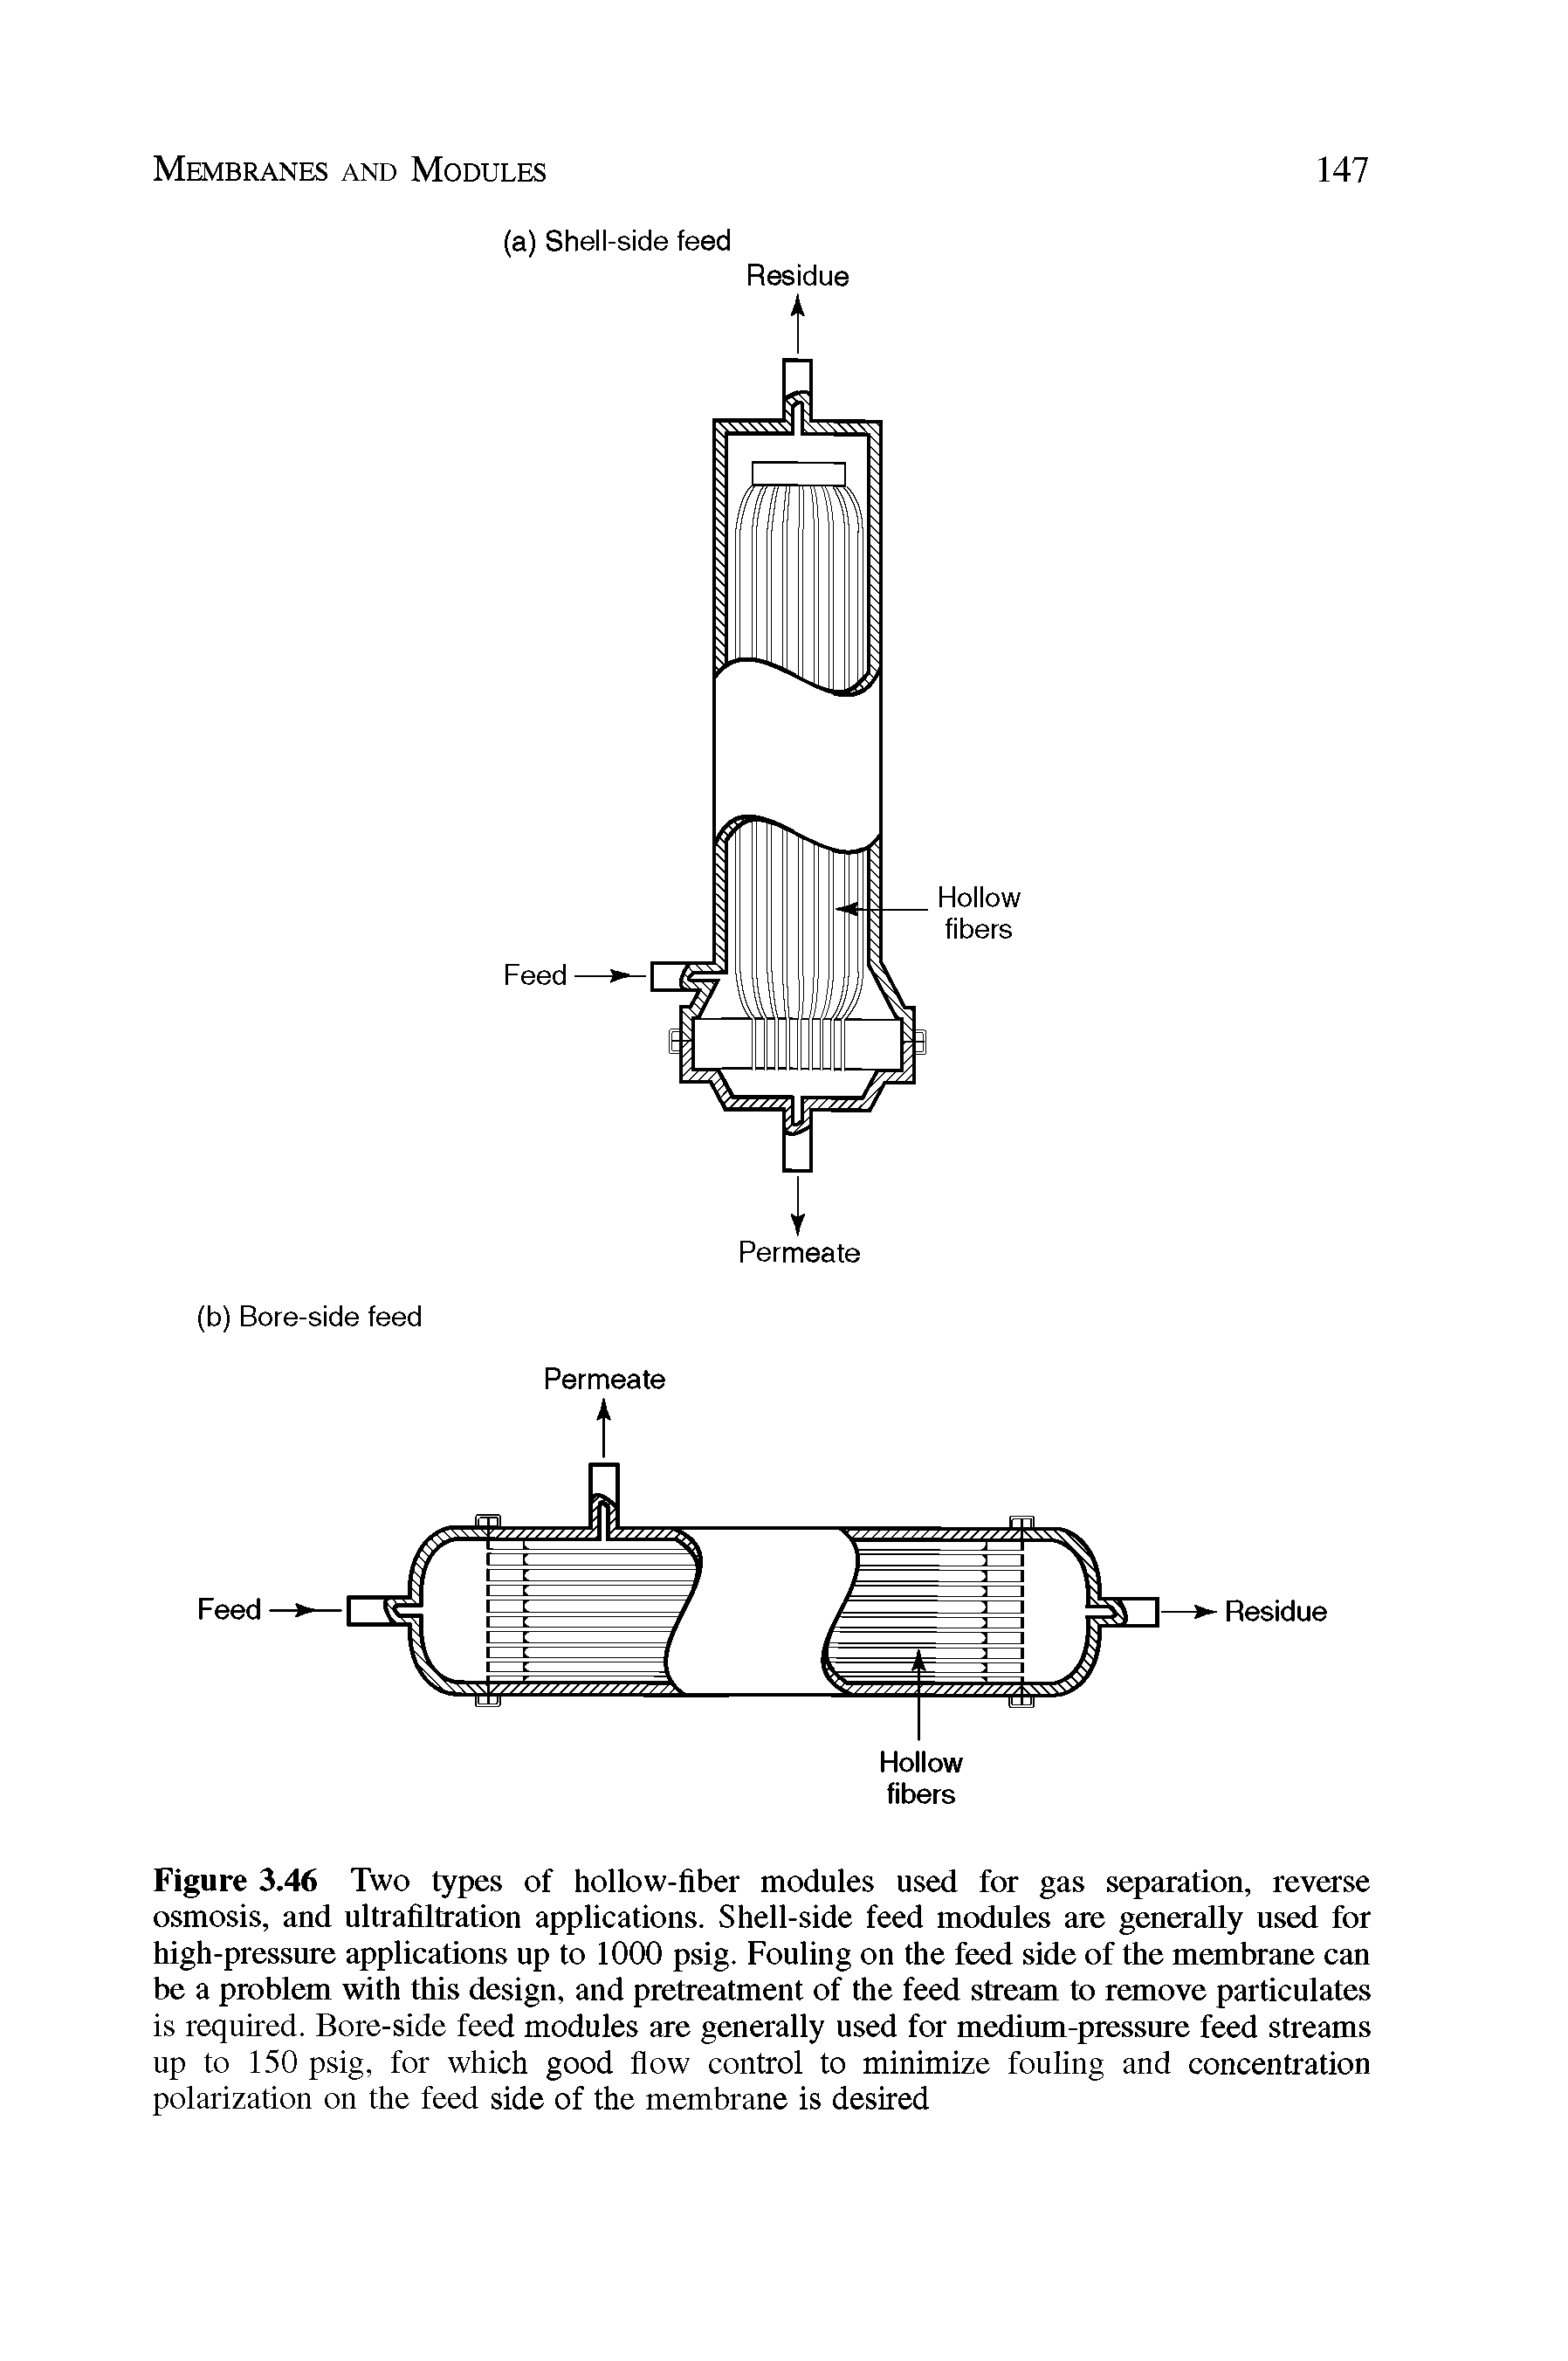 Figure 3.46 Two types of hollow-fiber modules used for gas separation, reverse osmosis, and ultrafiltration applications. Shell-side feed modules are generally used for high-pressure applications up to 1000 psig. Fouling on the feed side of the membrane can be a problem with this design, and pretreatment of the feed stream to remove particulates is required. Bore-side feed modules are generally used for medium-pressure feed streams up to 150 psig, for which good flow control to minimize fouling and concentration polarization on the feed side of the membrane is desired...